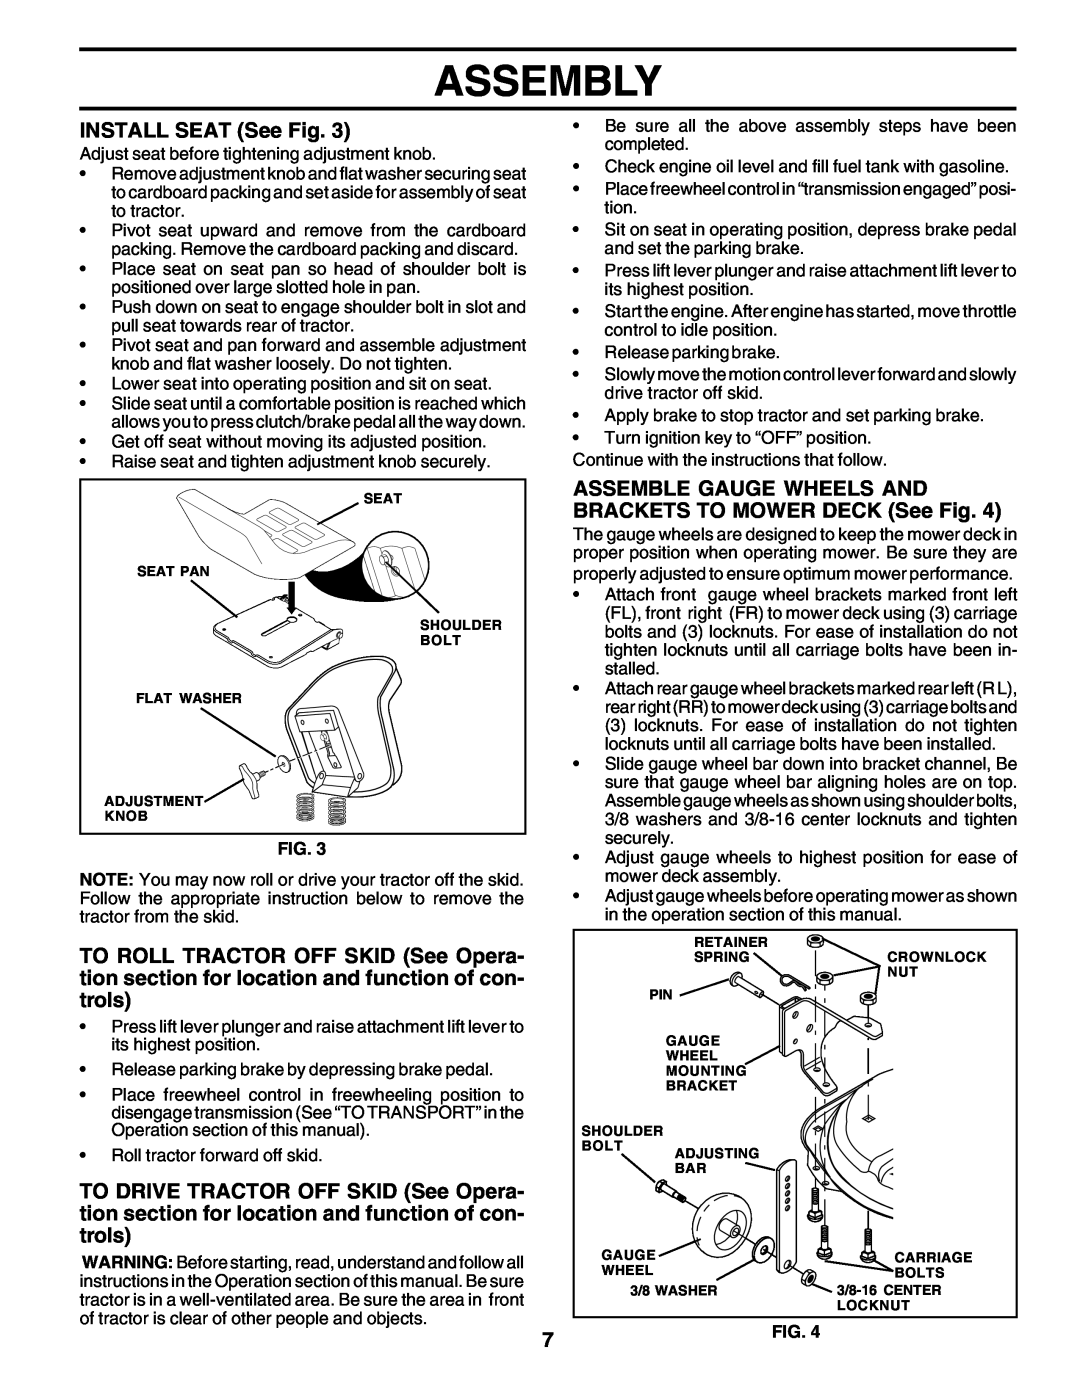 Poulan PRGT22H50D owner manual Assembly, INSTALL SEAT See Fig 